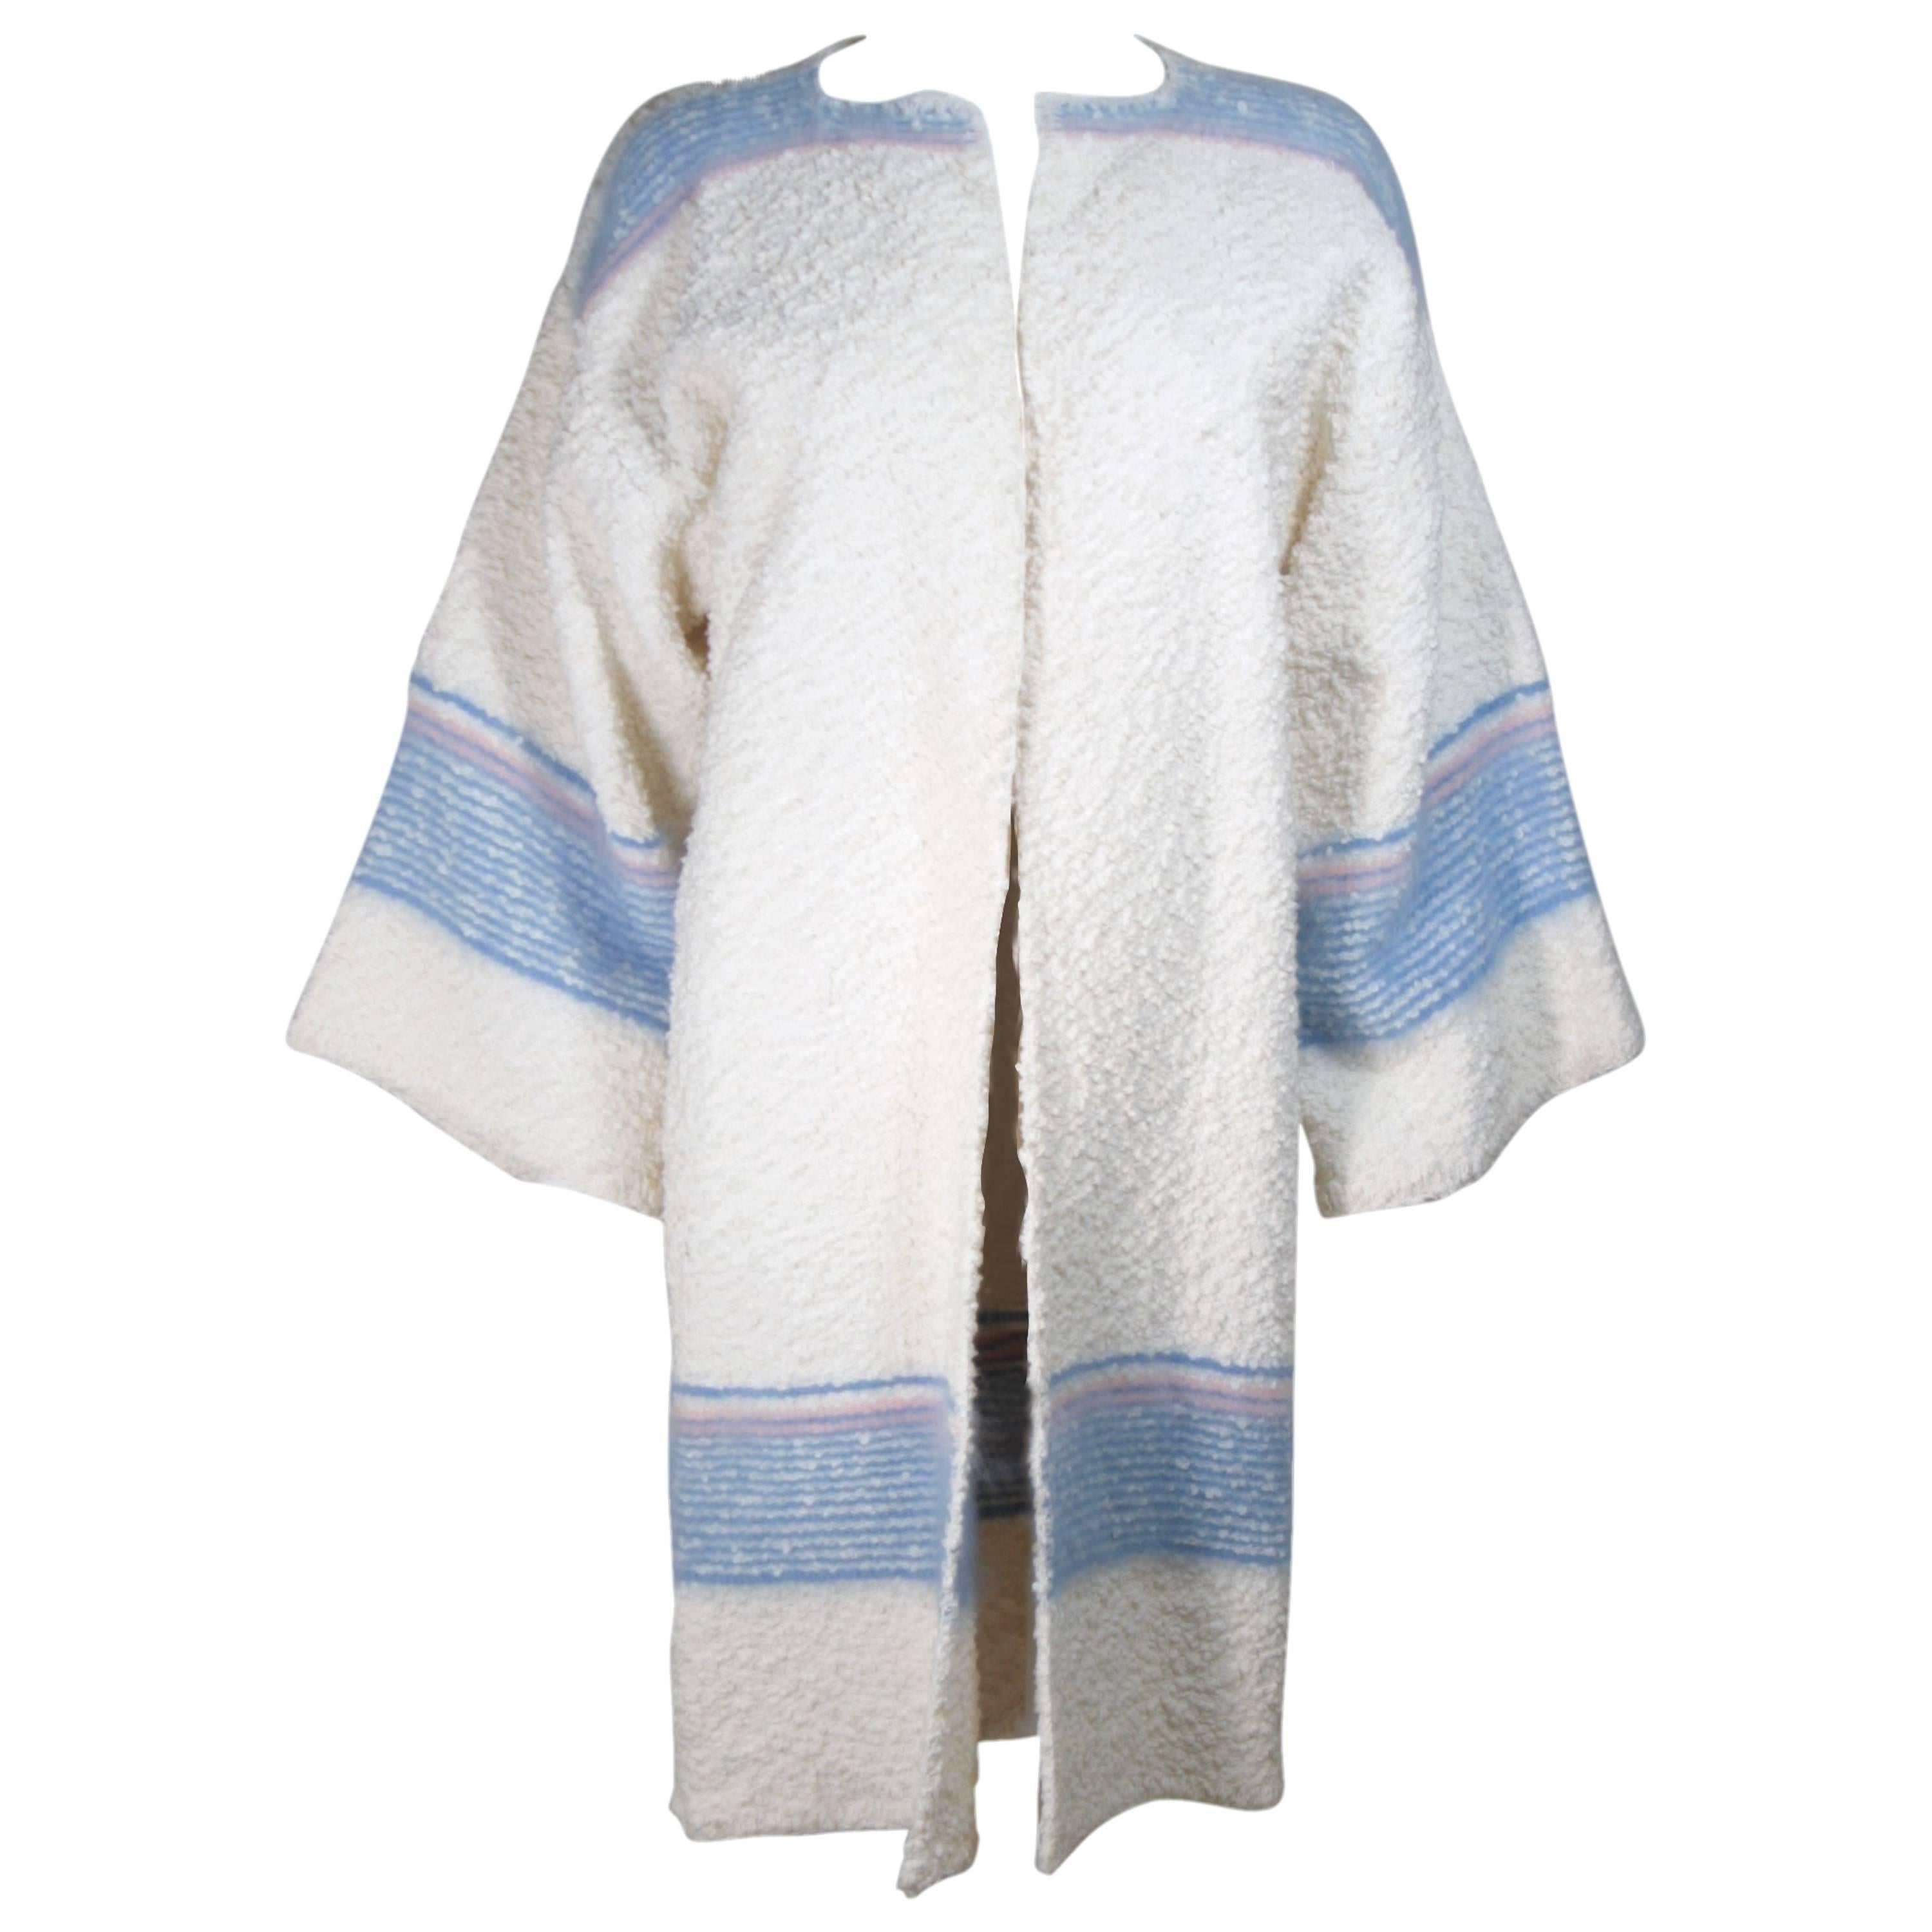 MICHAELE VOLLBRACHT Circa 1980's Boucle Wool and Angora Knit Sweater  For Sale